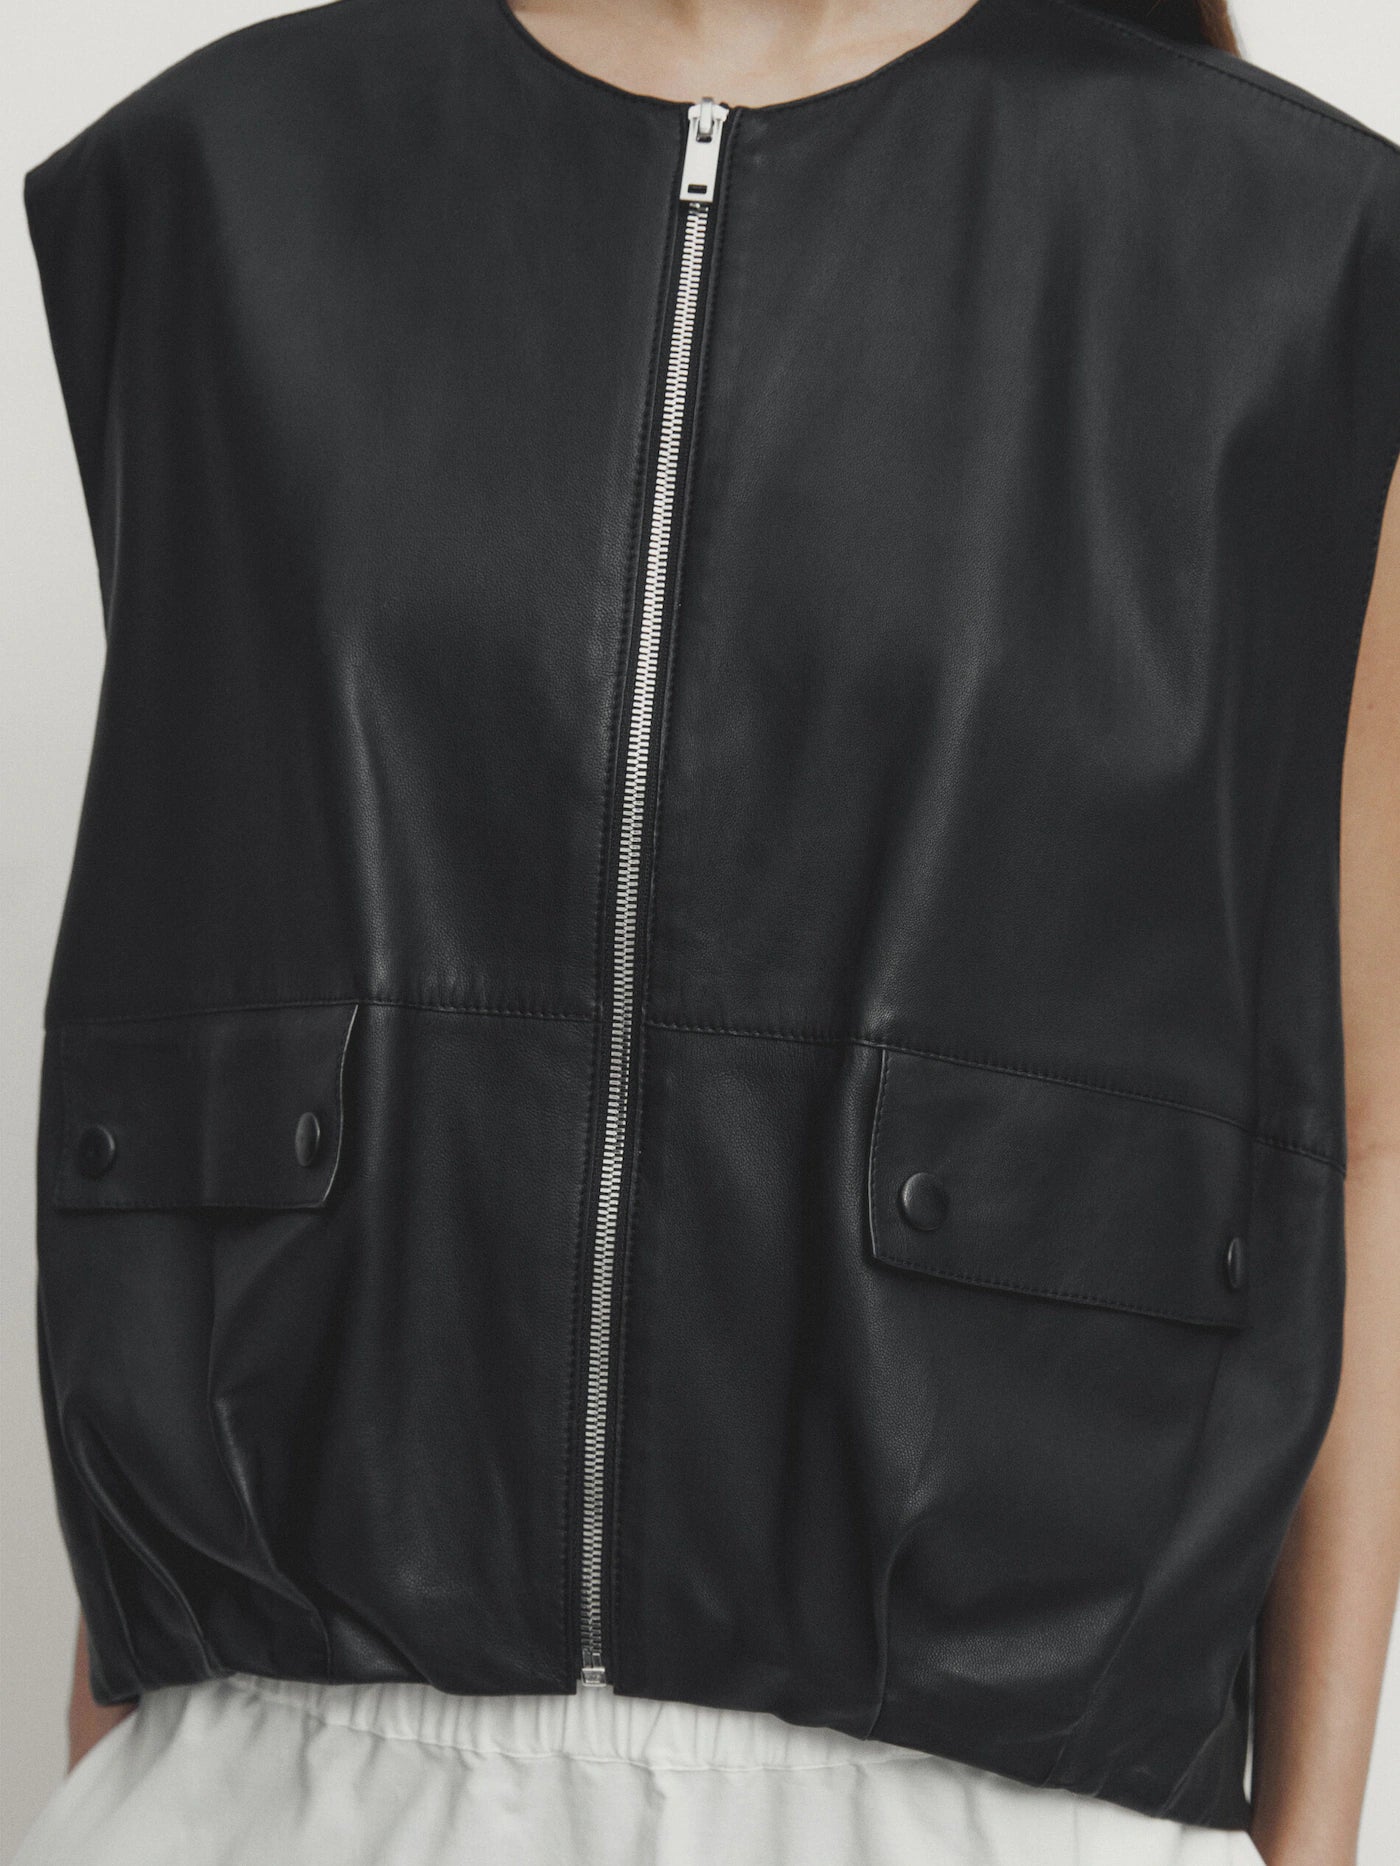 Nappa leather gilet with zip